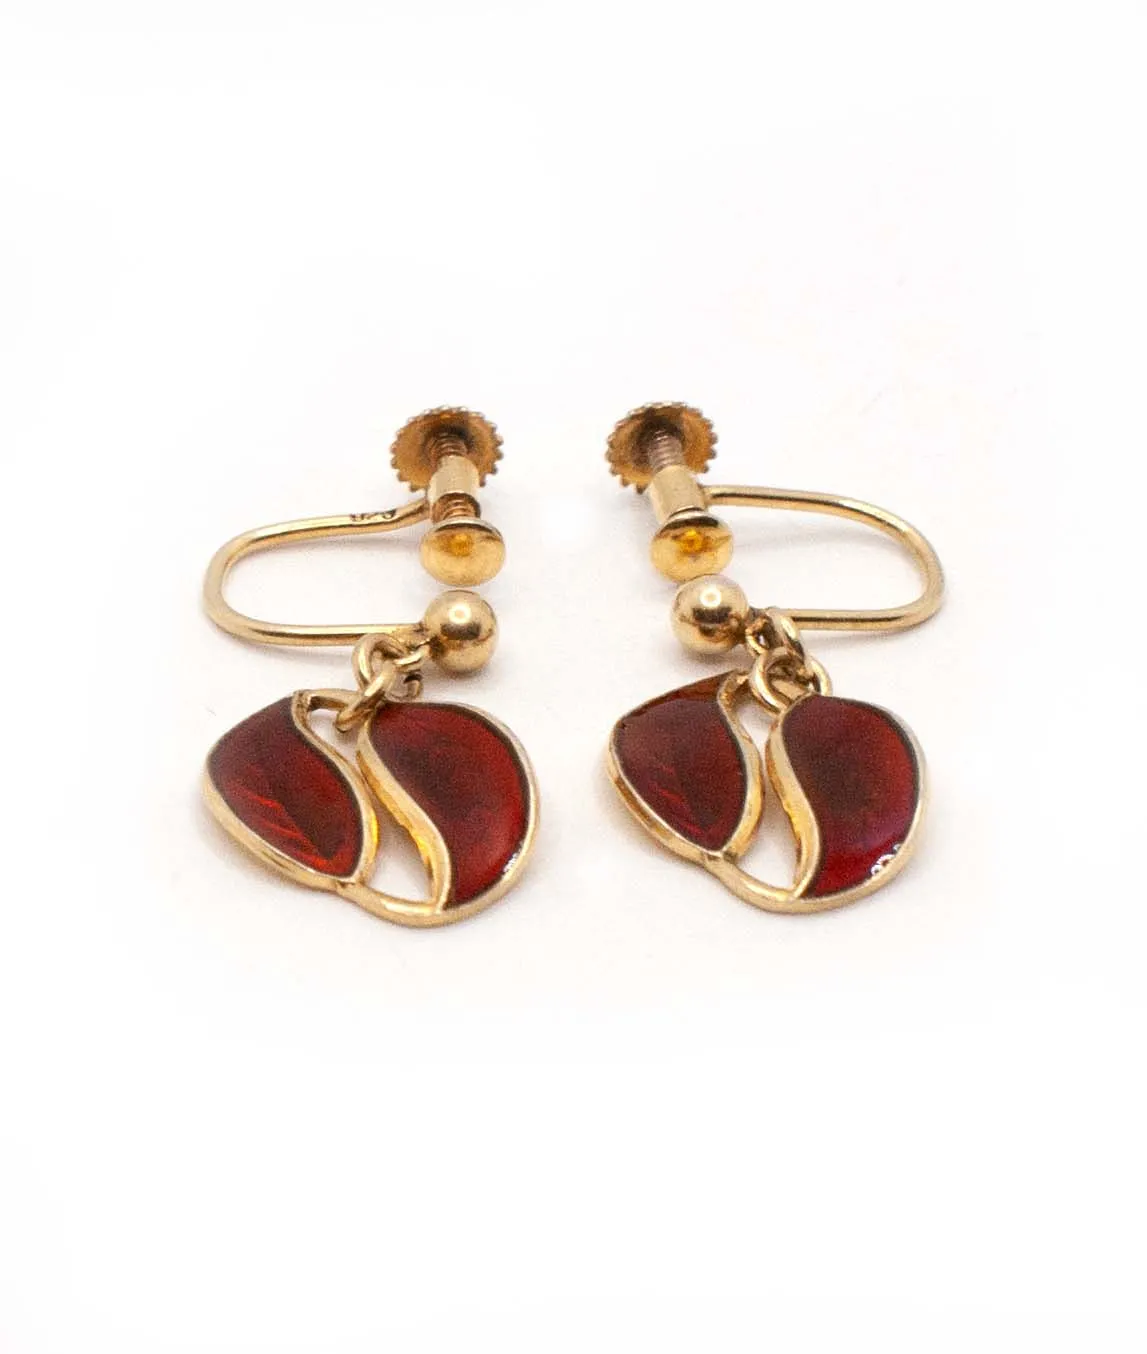 Red enamel dangle midcentury leaf earrings on gilded silver with screw back fittings